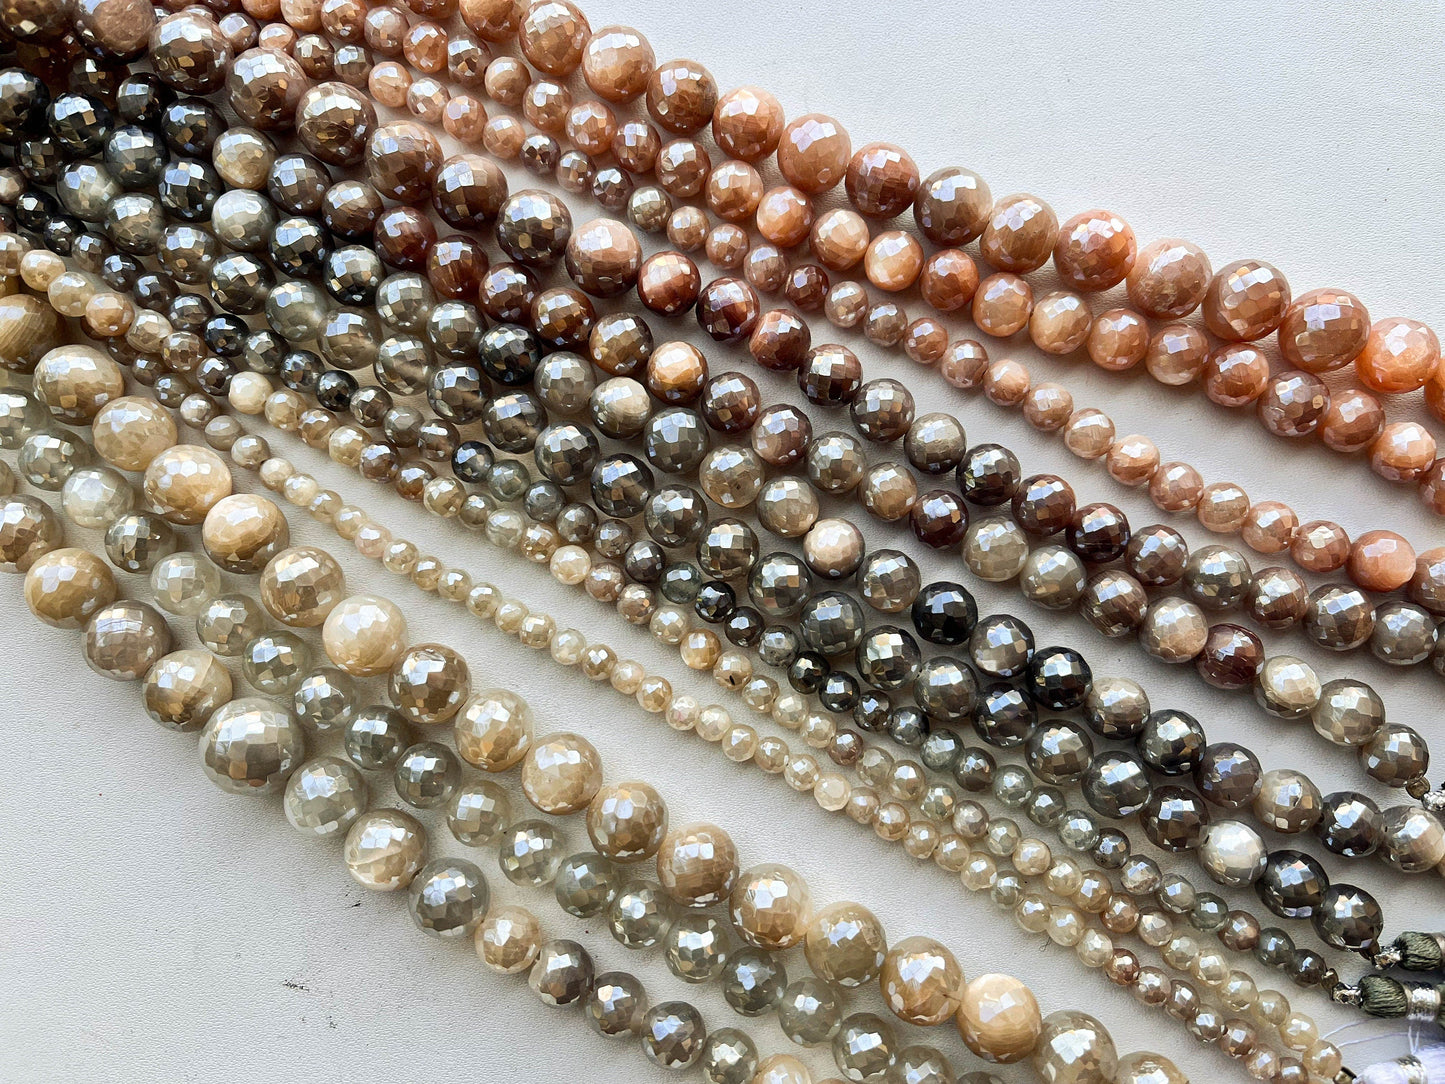 9 Inch MOONSTONE Coated Faceted Balls | Natural Moonstone Gemstone in Various Colors | Beadsforyourjewelry Beadsforyourjewelry